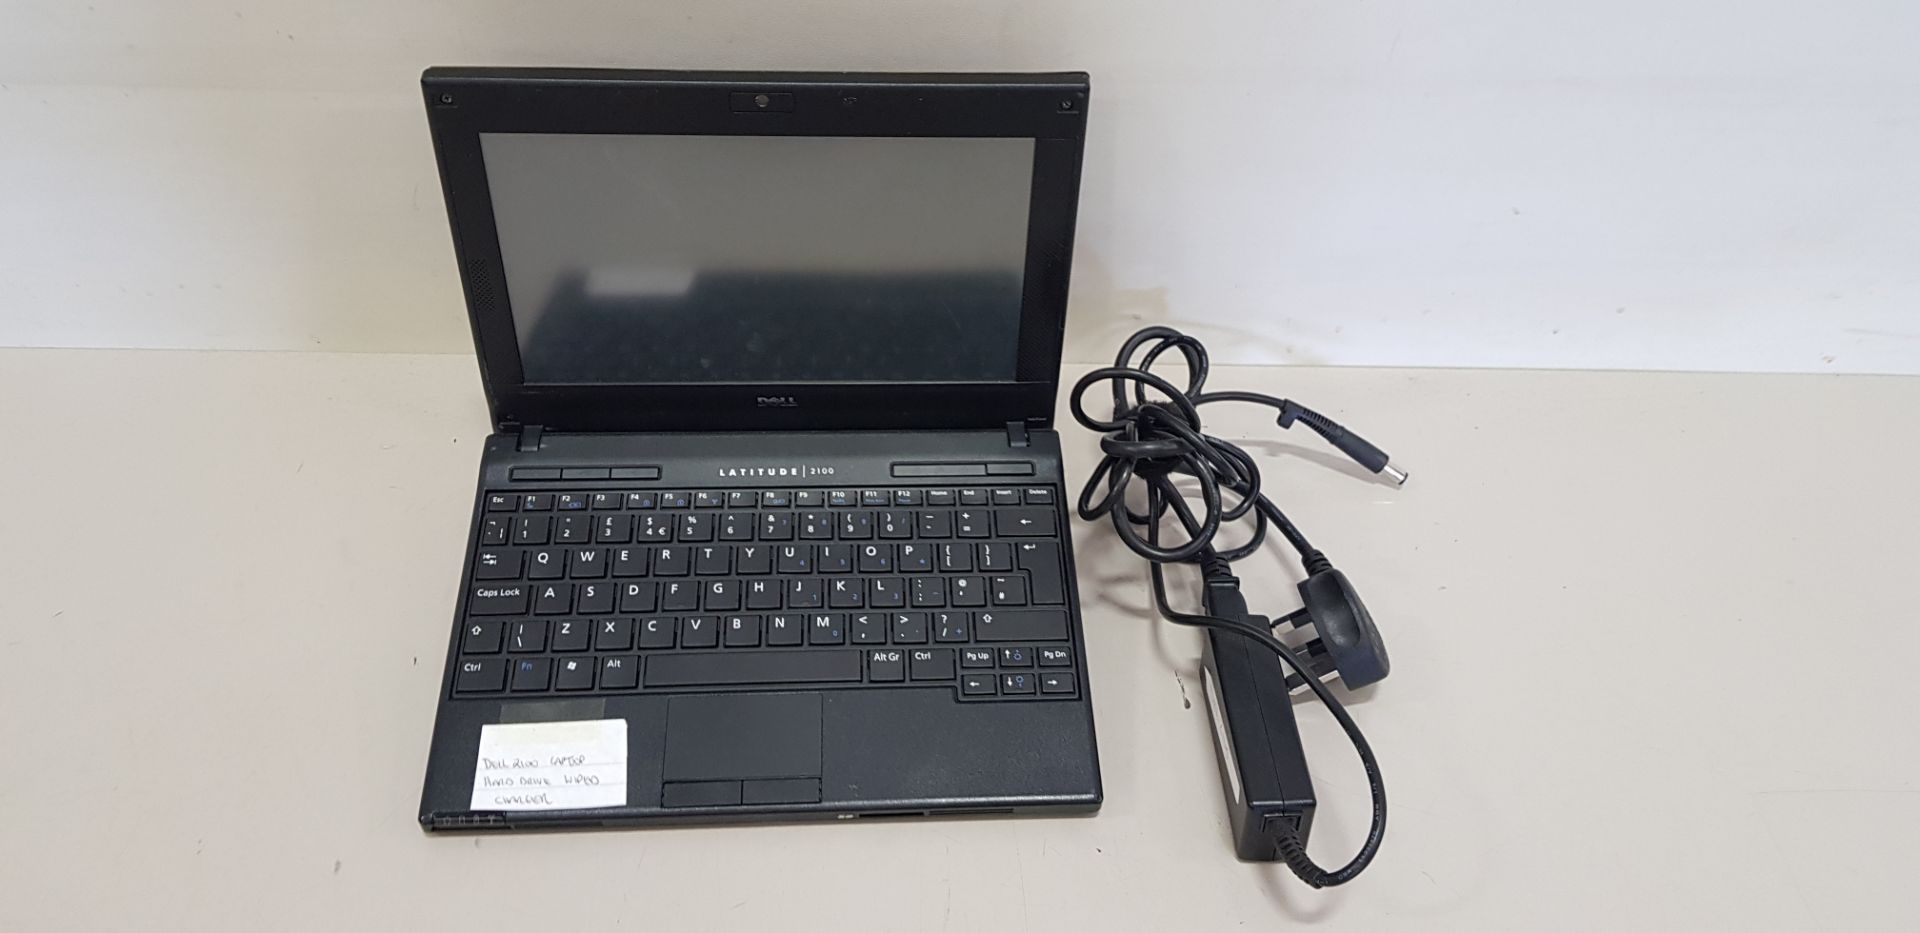 DELL 2100 LAPTOP - HARD DRIVE WIPED - COMES WITH CHARGER